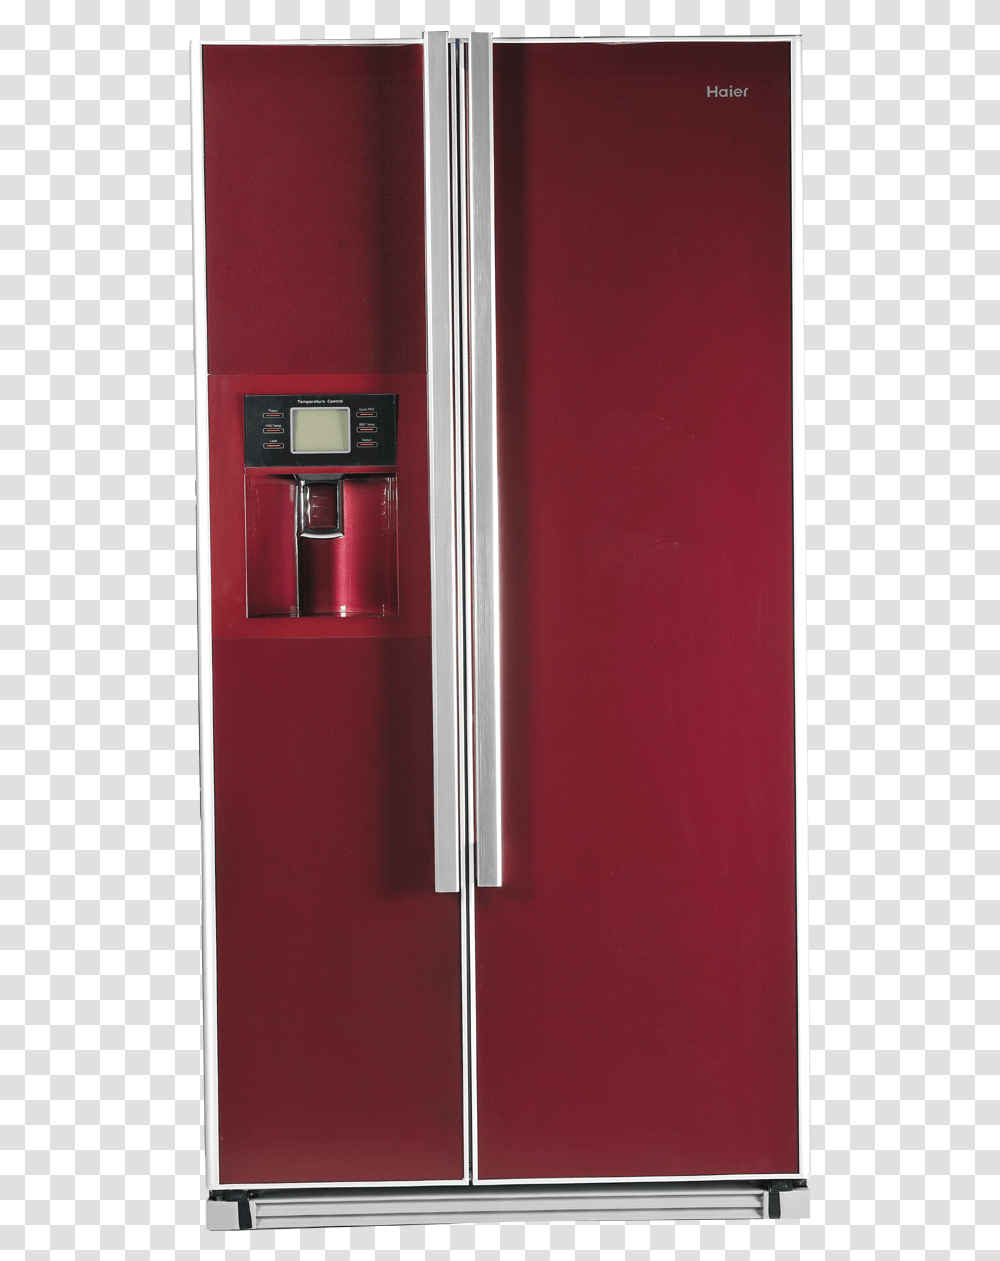 Refrigerator Clipart Double Door Red Refrigerator, Appliance Transparent Png